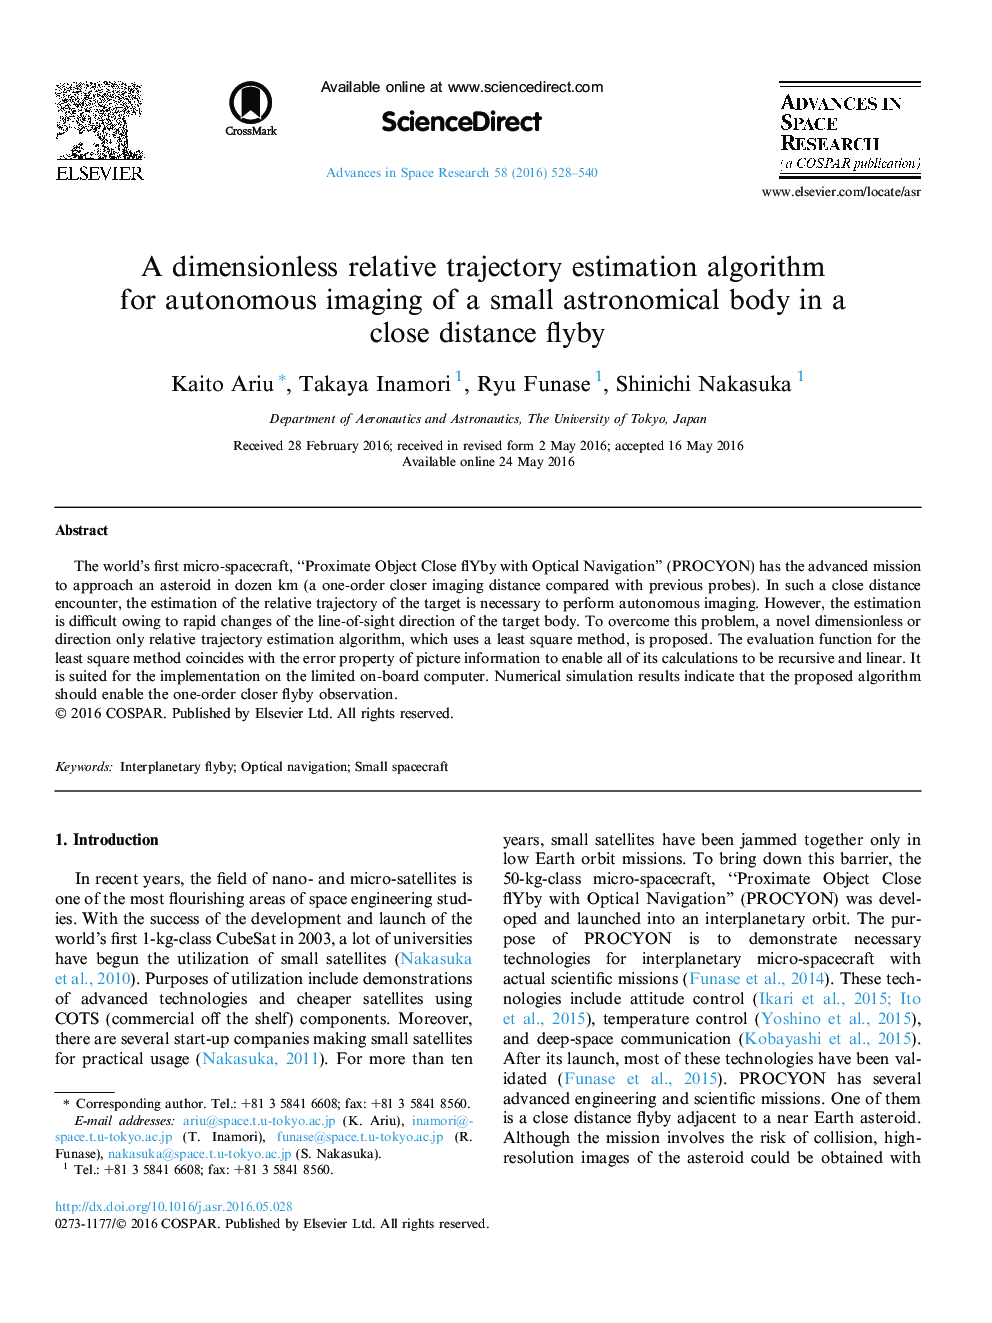 A dimensionless relative trajectory estimation algorithm for autonomous imaging of a small astronomical body in a close distance flyby